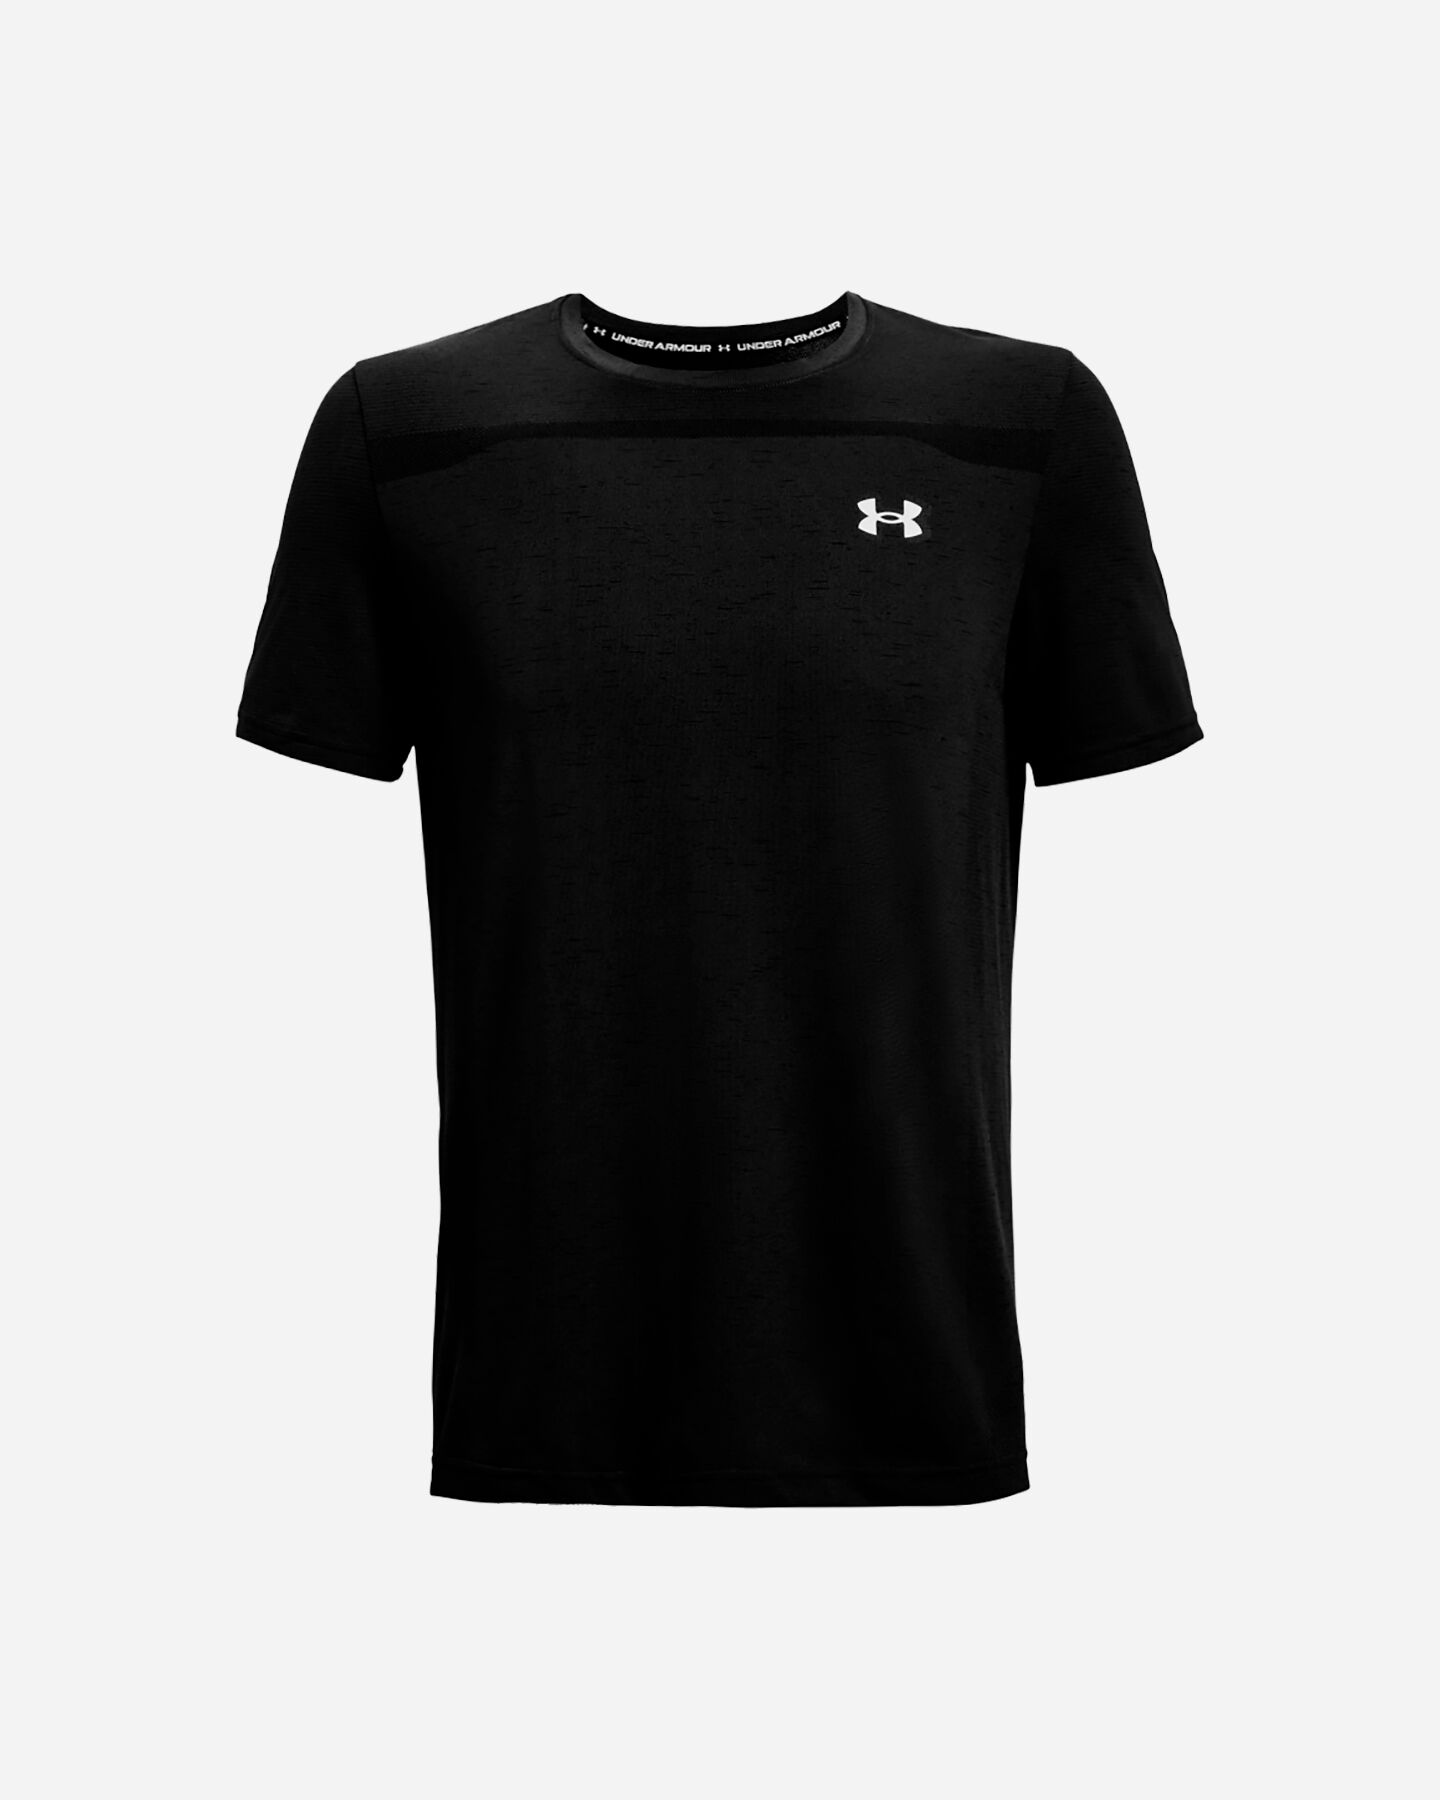  T-Shirt training UNDER ARMOUR SEAMLESS  M S5287054|0001|SM scatto 0